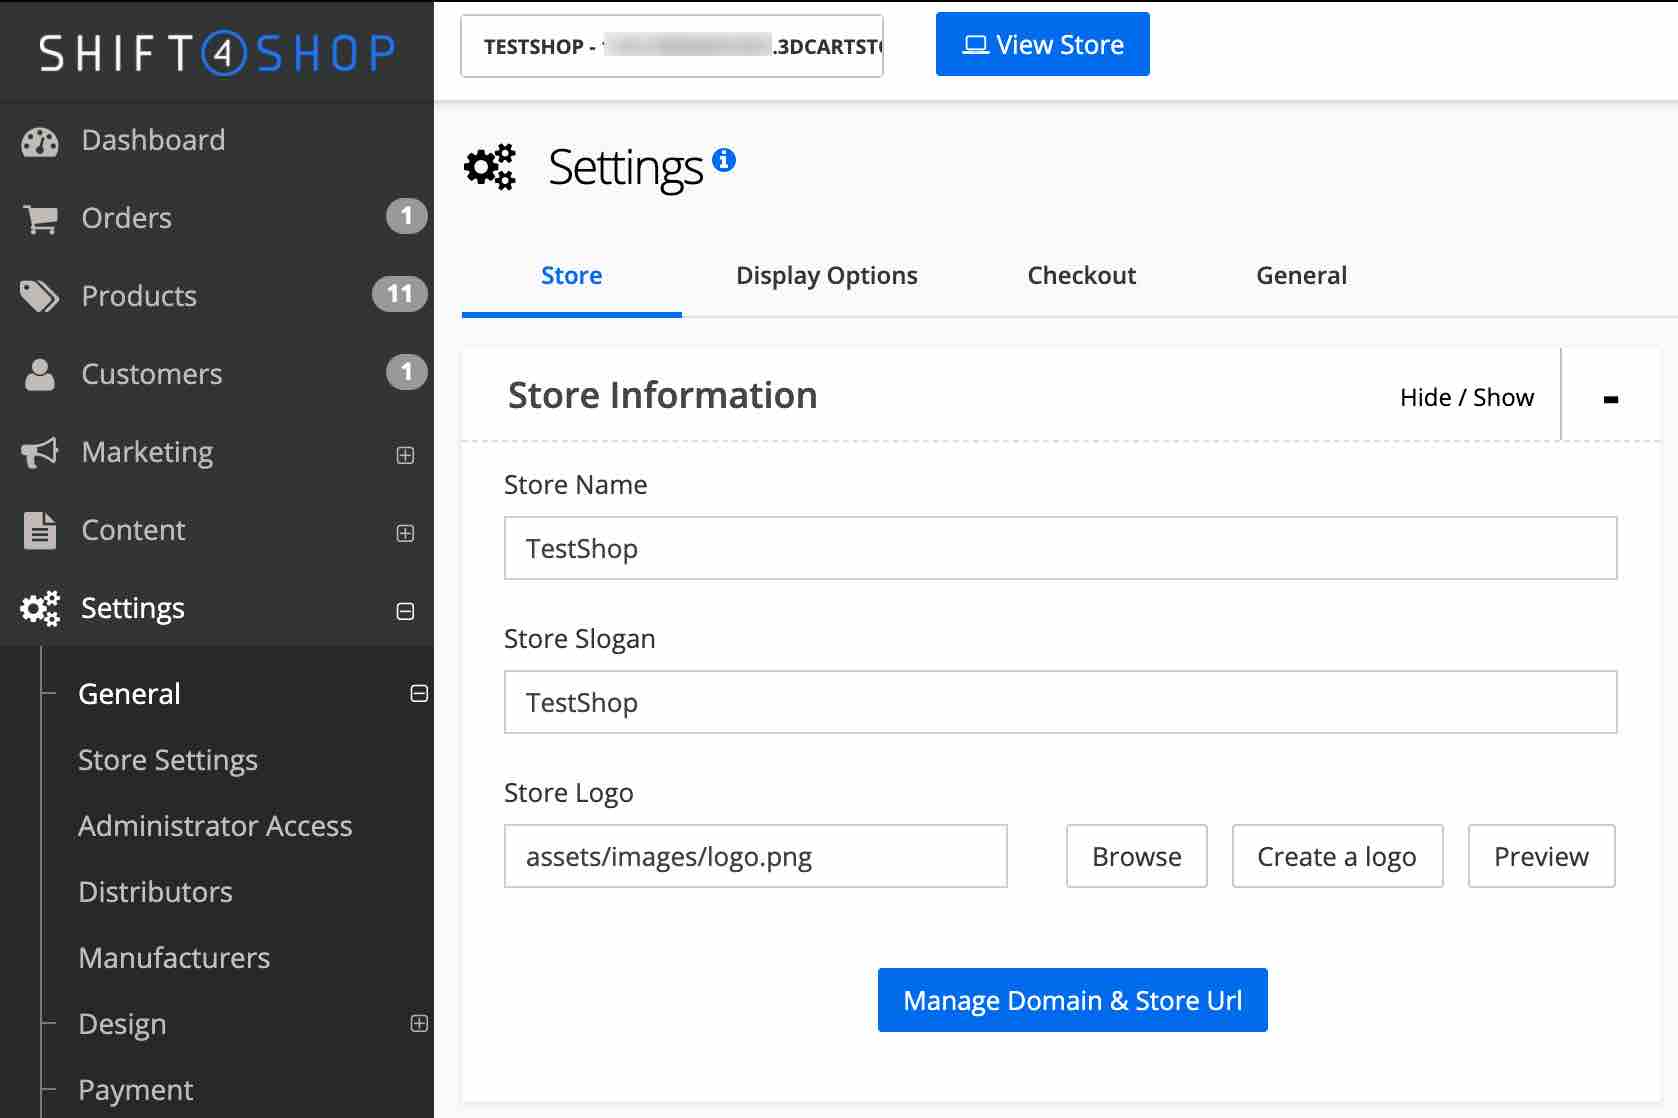 Shift4Shop settings page showing store information